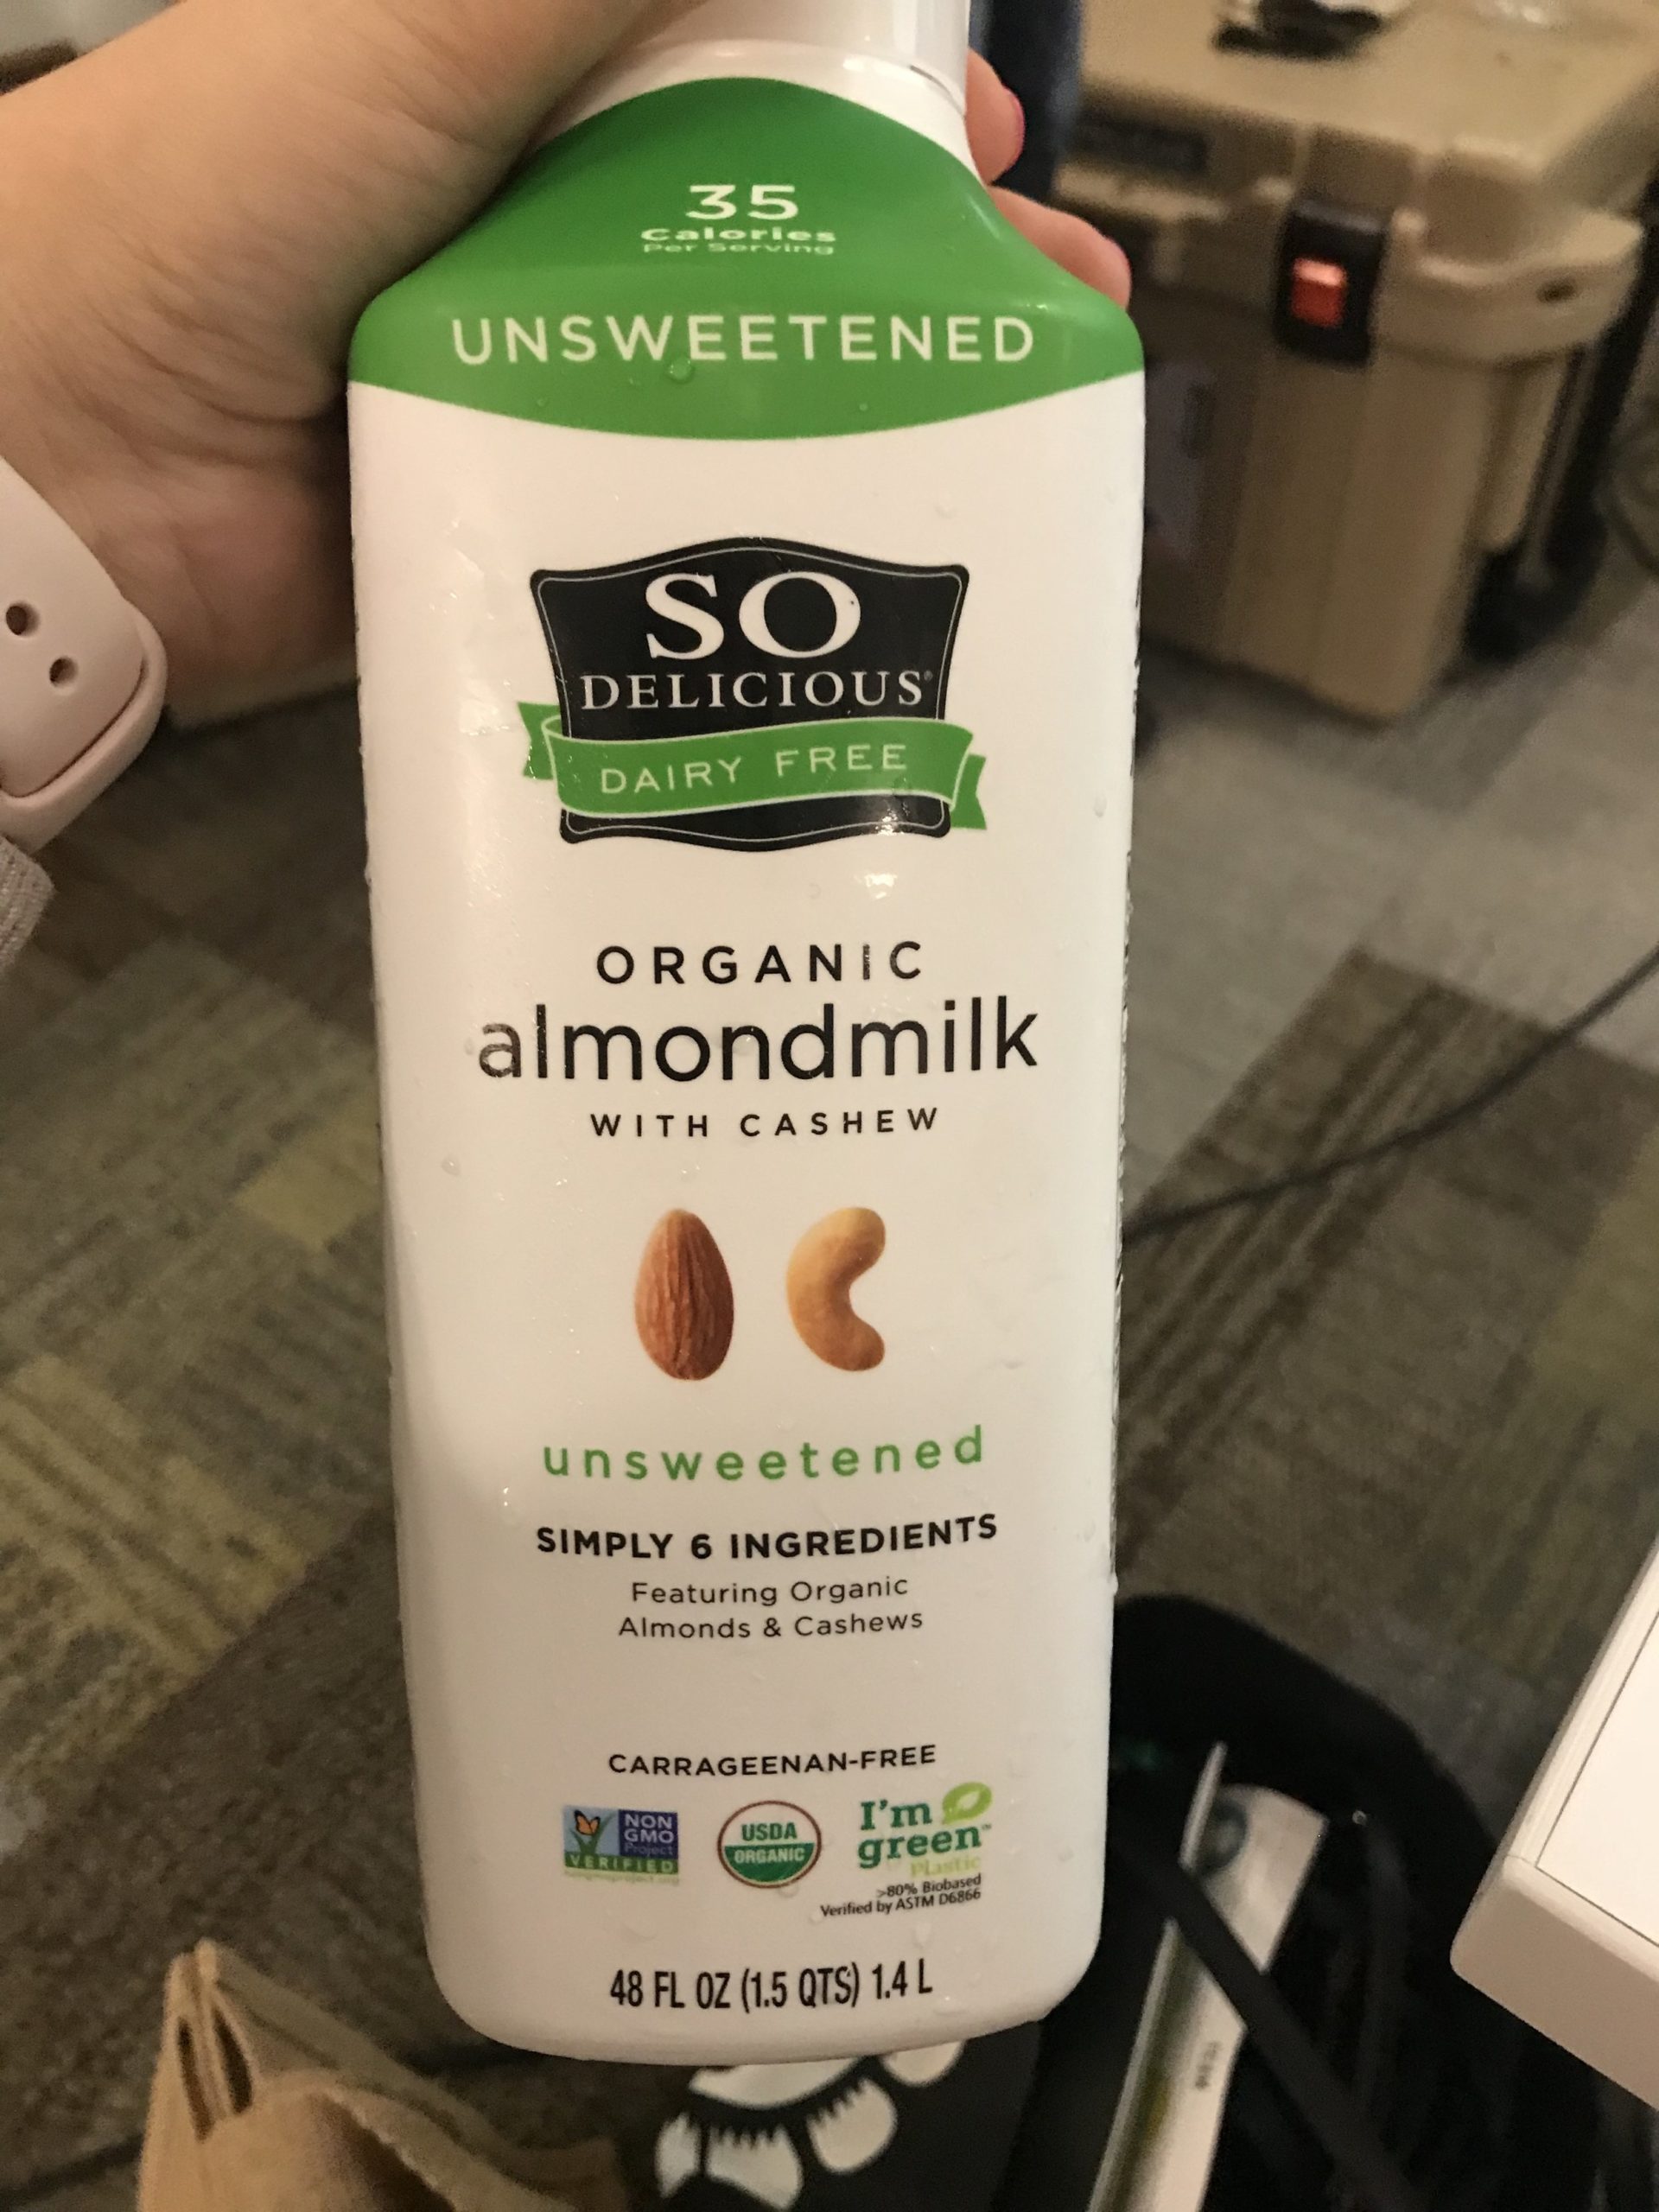  This new almond cashew milk from So Delicious has the shortest ingredient list I've seen on almond milk! 